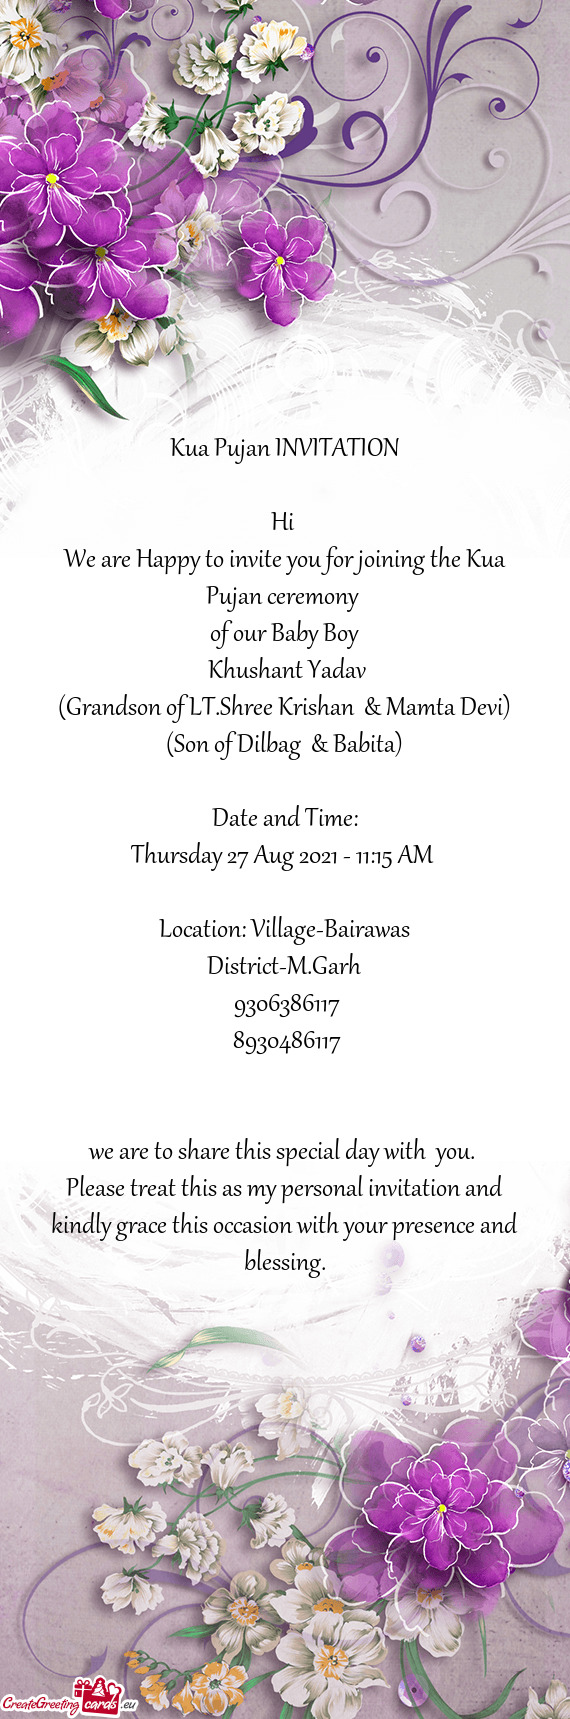 We are Happy to invite you for joining the Kua Pujan ceremony